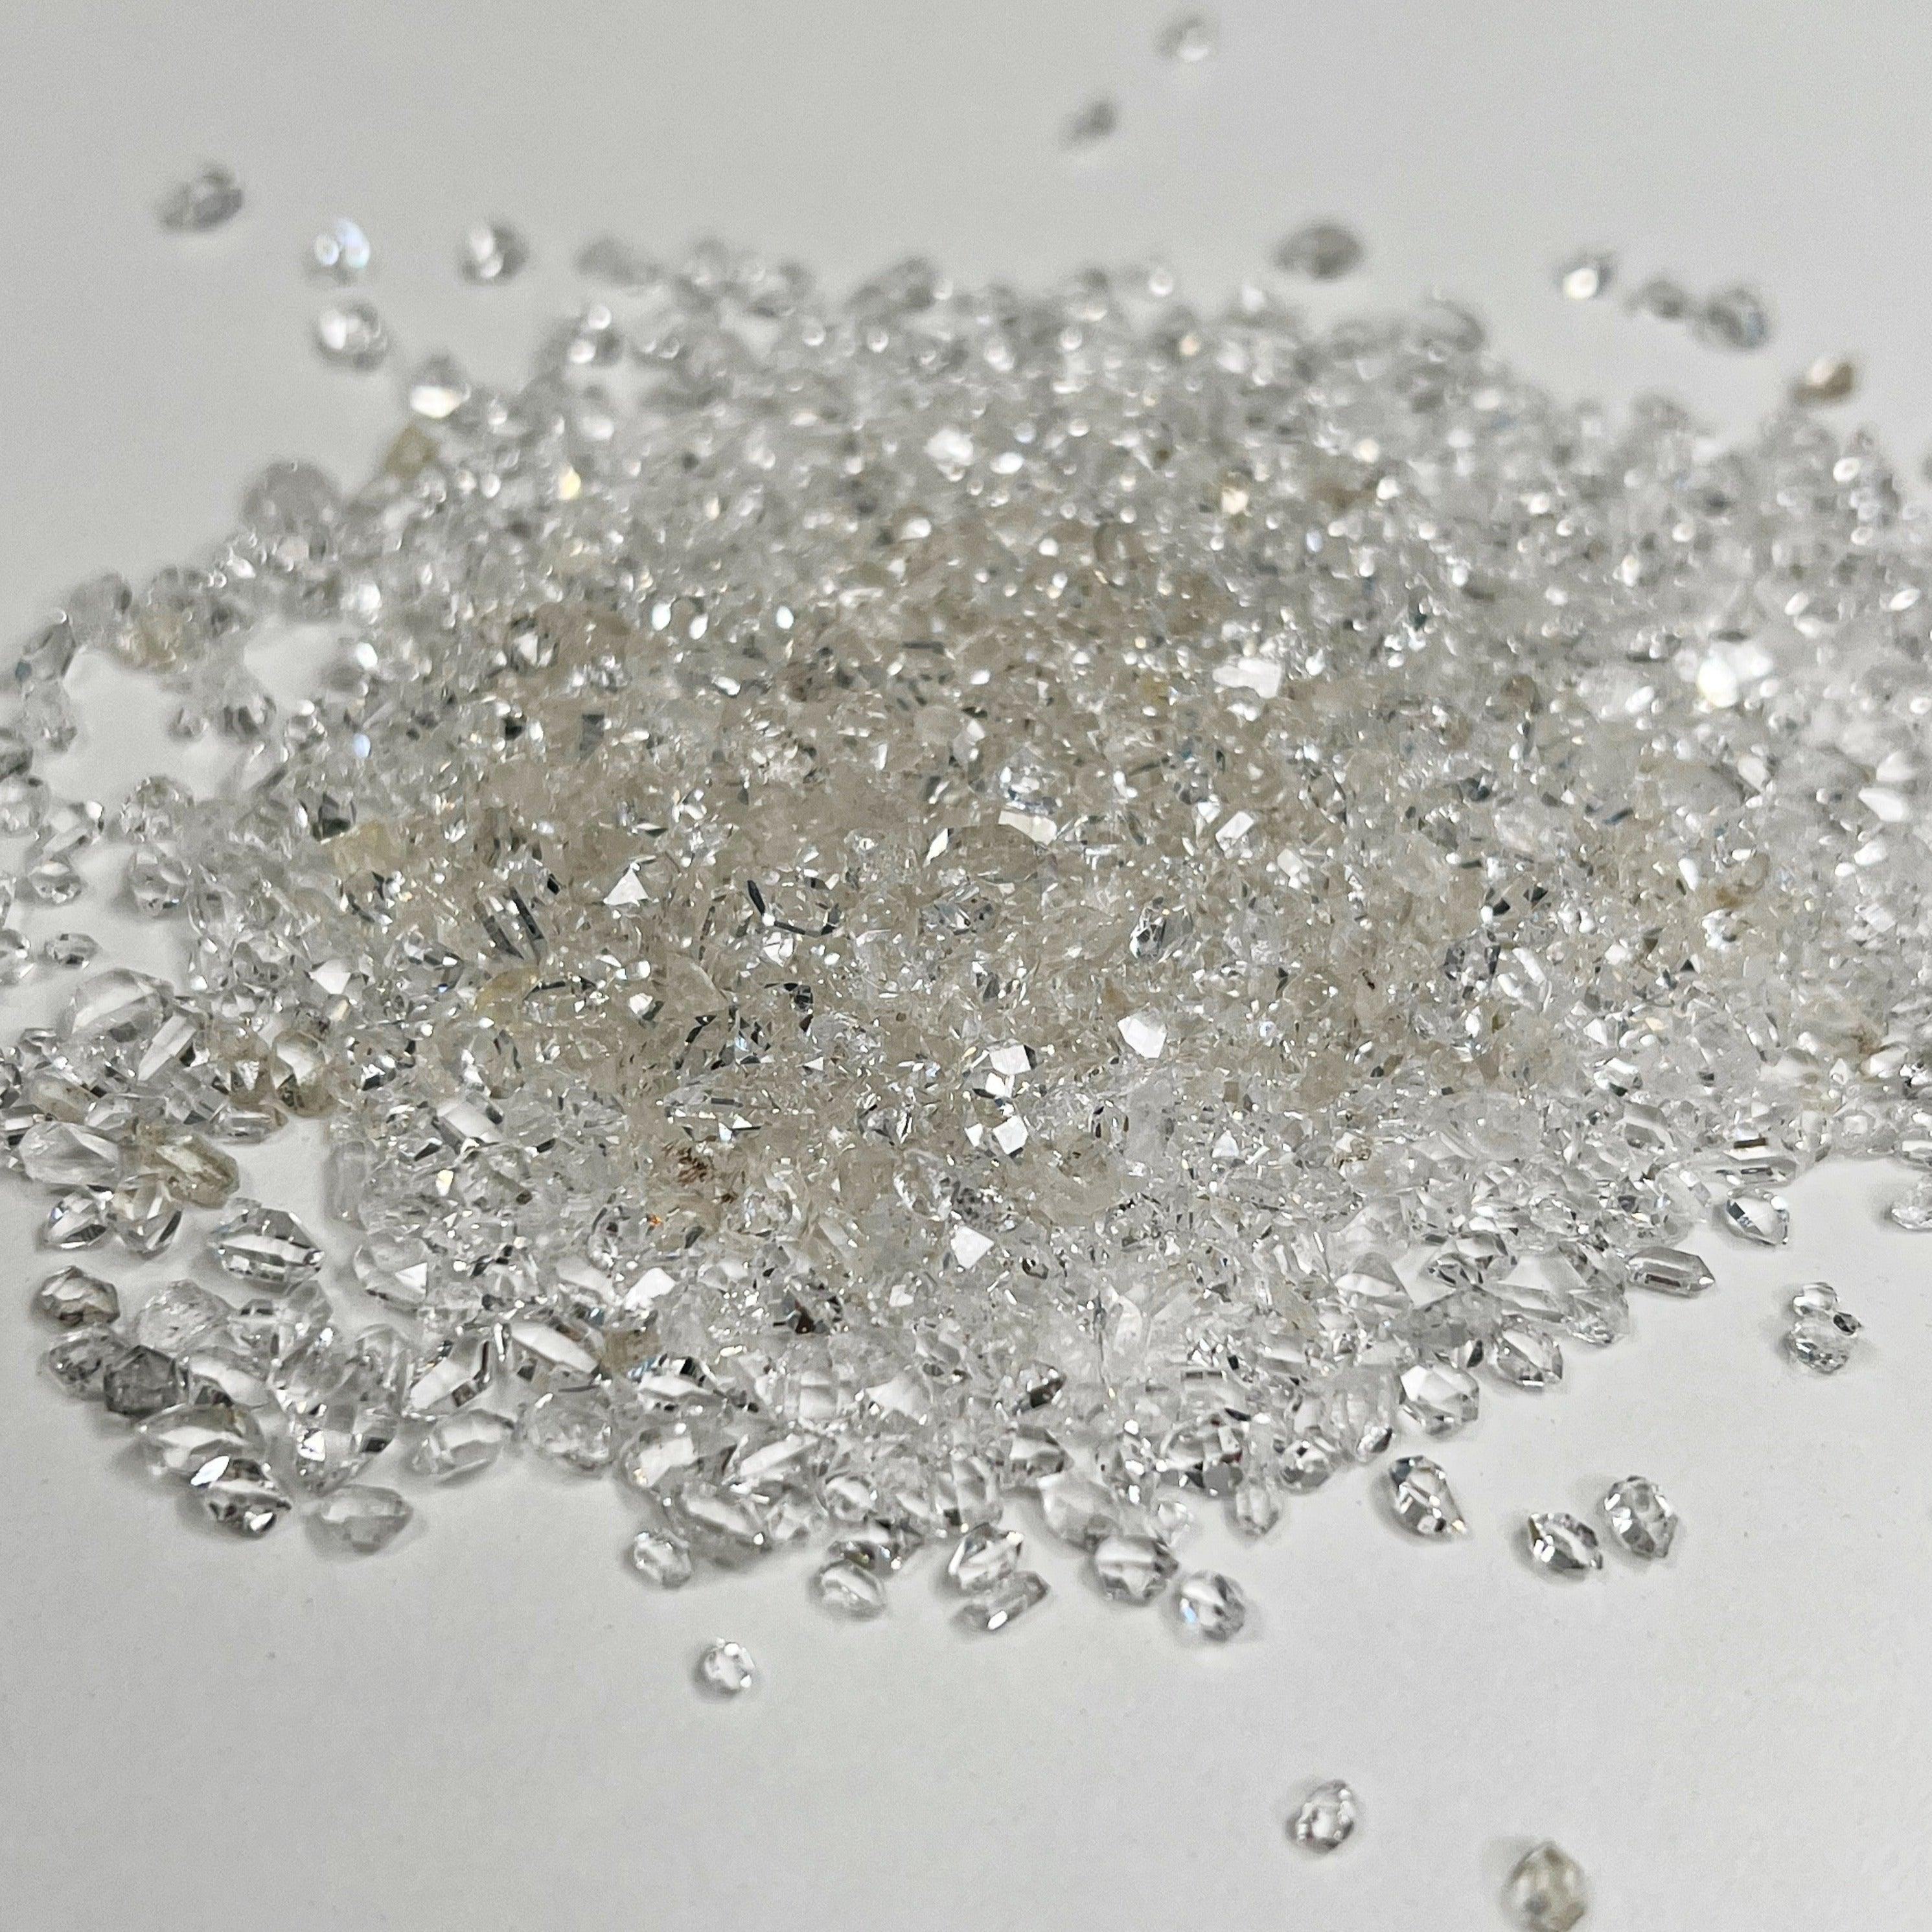 PAKIMER "DIAMOND DUST" BAGGIE (5g) - 33 bday, 444 sale, baggie, diamond dust, emotional support, end of year sale, gridding, herkimer, herkimer diamond, holiday sale, new year sale, pakimer, pocket crystal, pocket crystals, transform gift bundle - The Mineral Maven